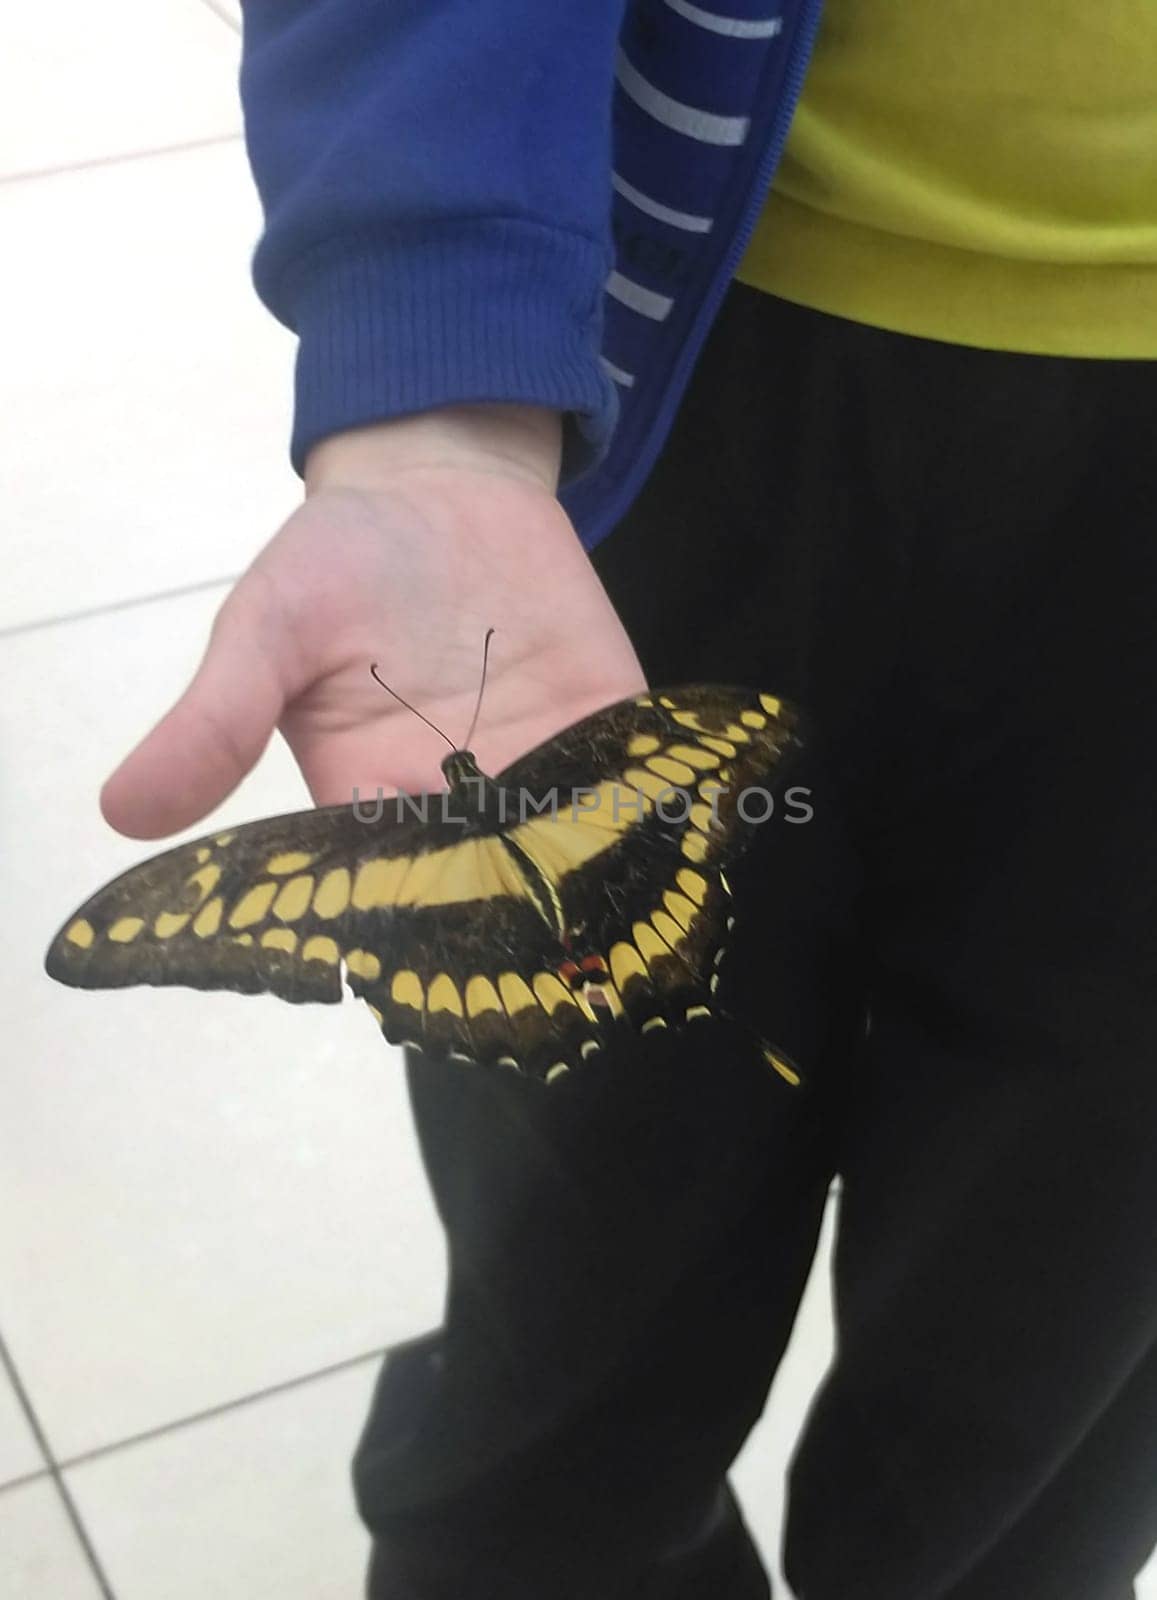 Rare Tropical Butterfly Sits on a Childs Hand. Black and Yellow Beautiful Fragile Butterfly on Boys Fingers Create Harmony of Nature. Beauty Magic Close-up.